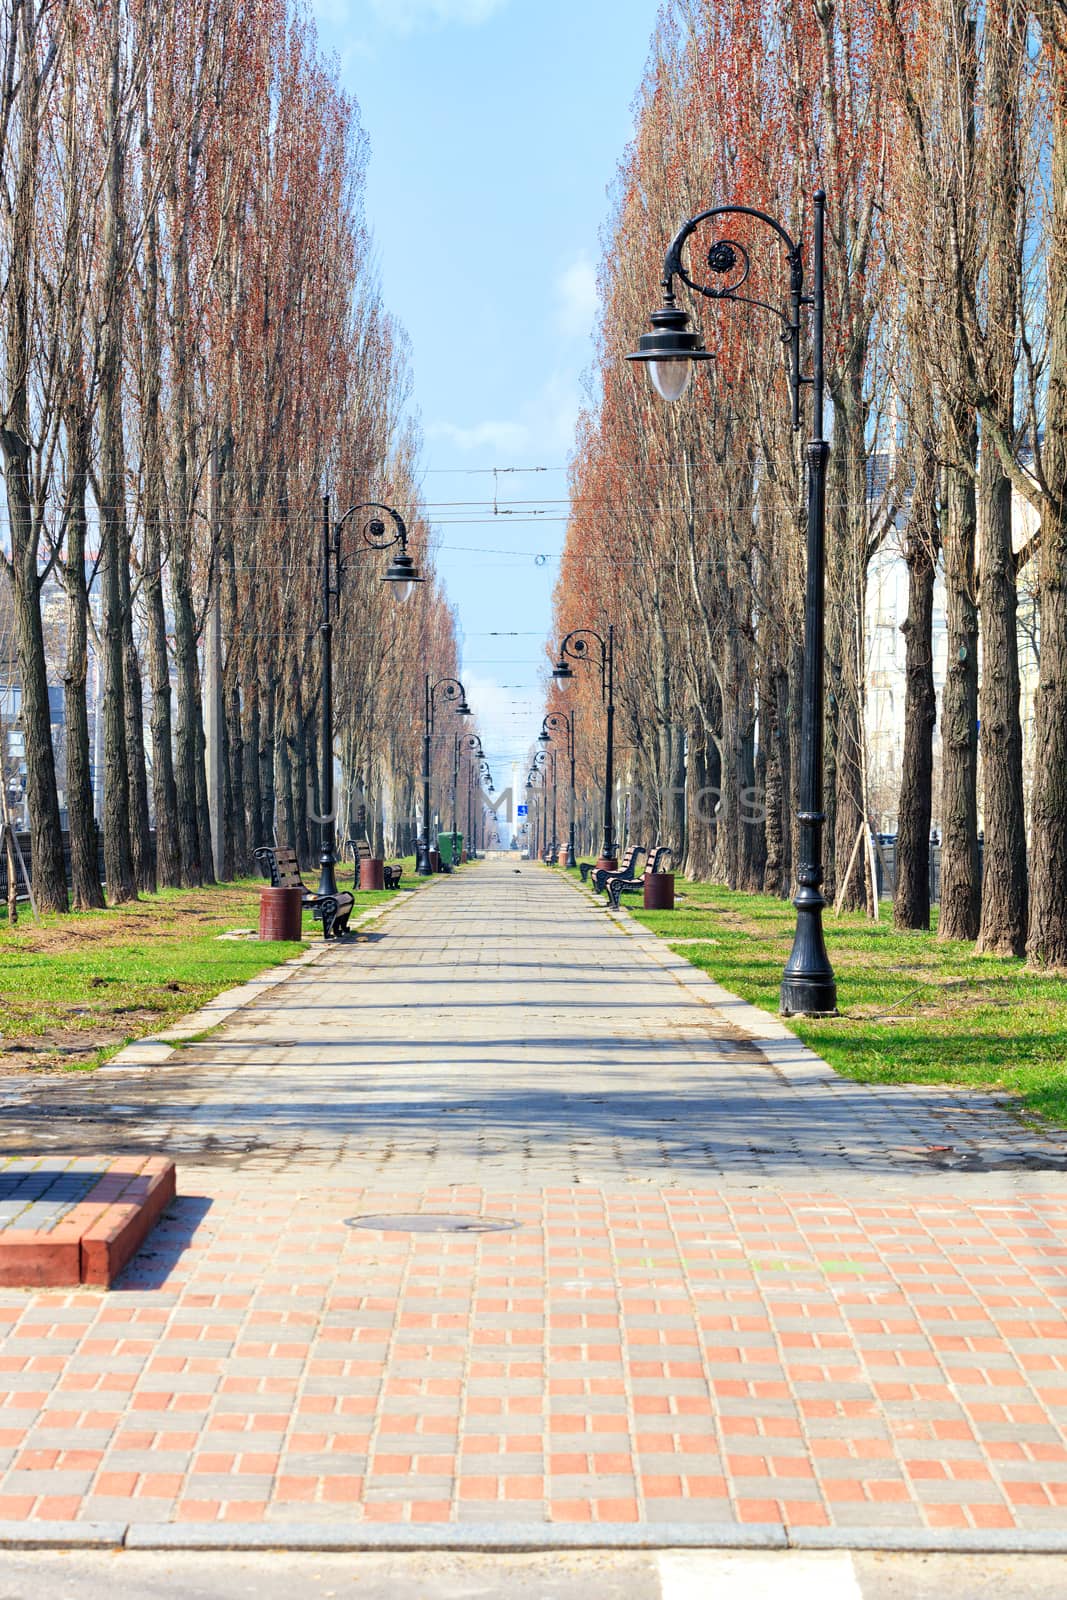 Poplar alley with vintage street lamps along the path, paved with paving slabs. by Sergii